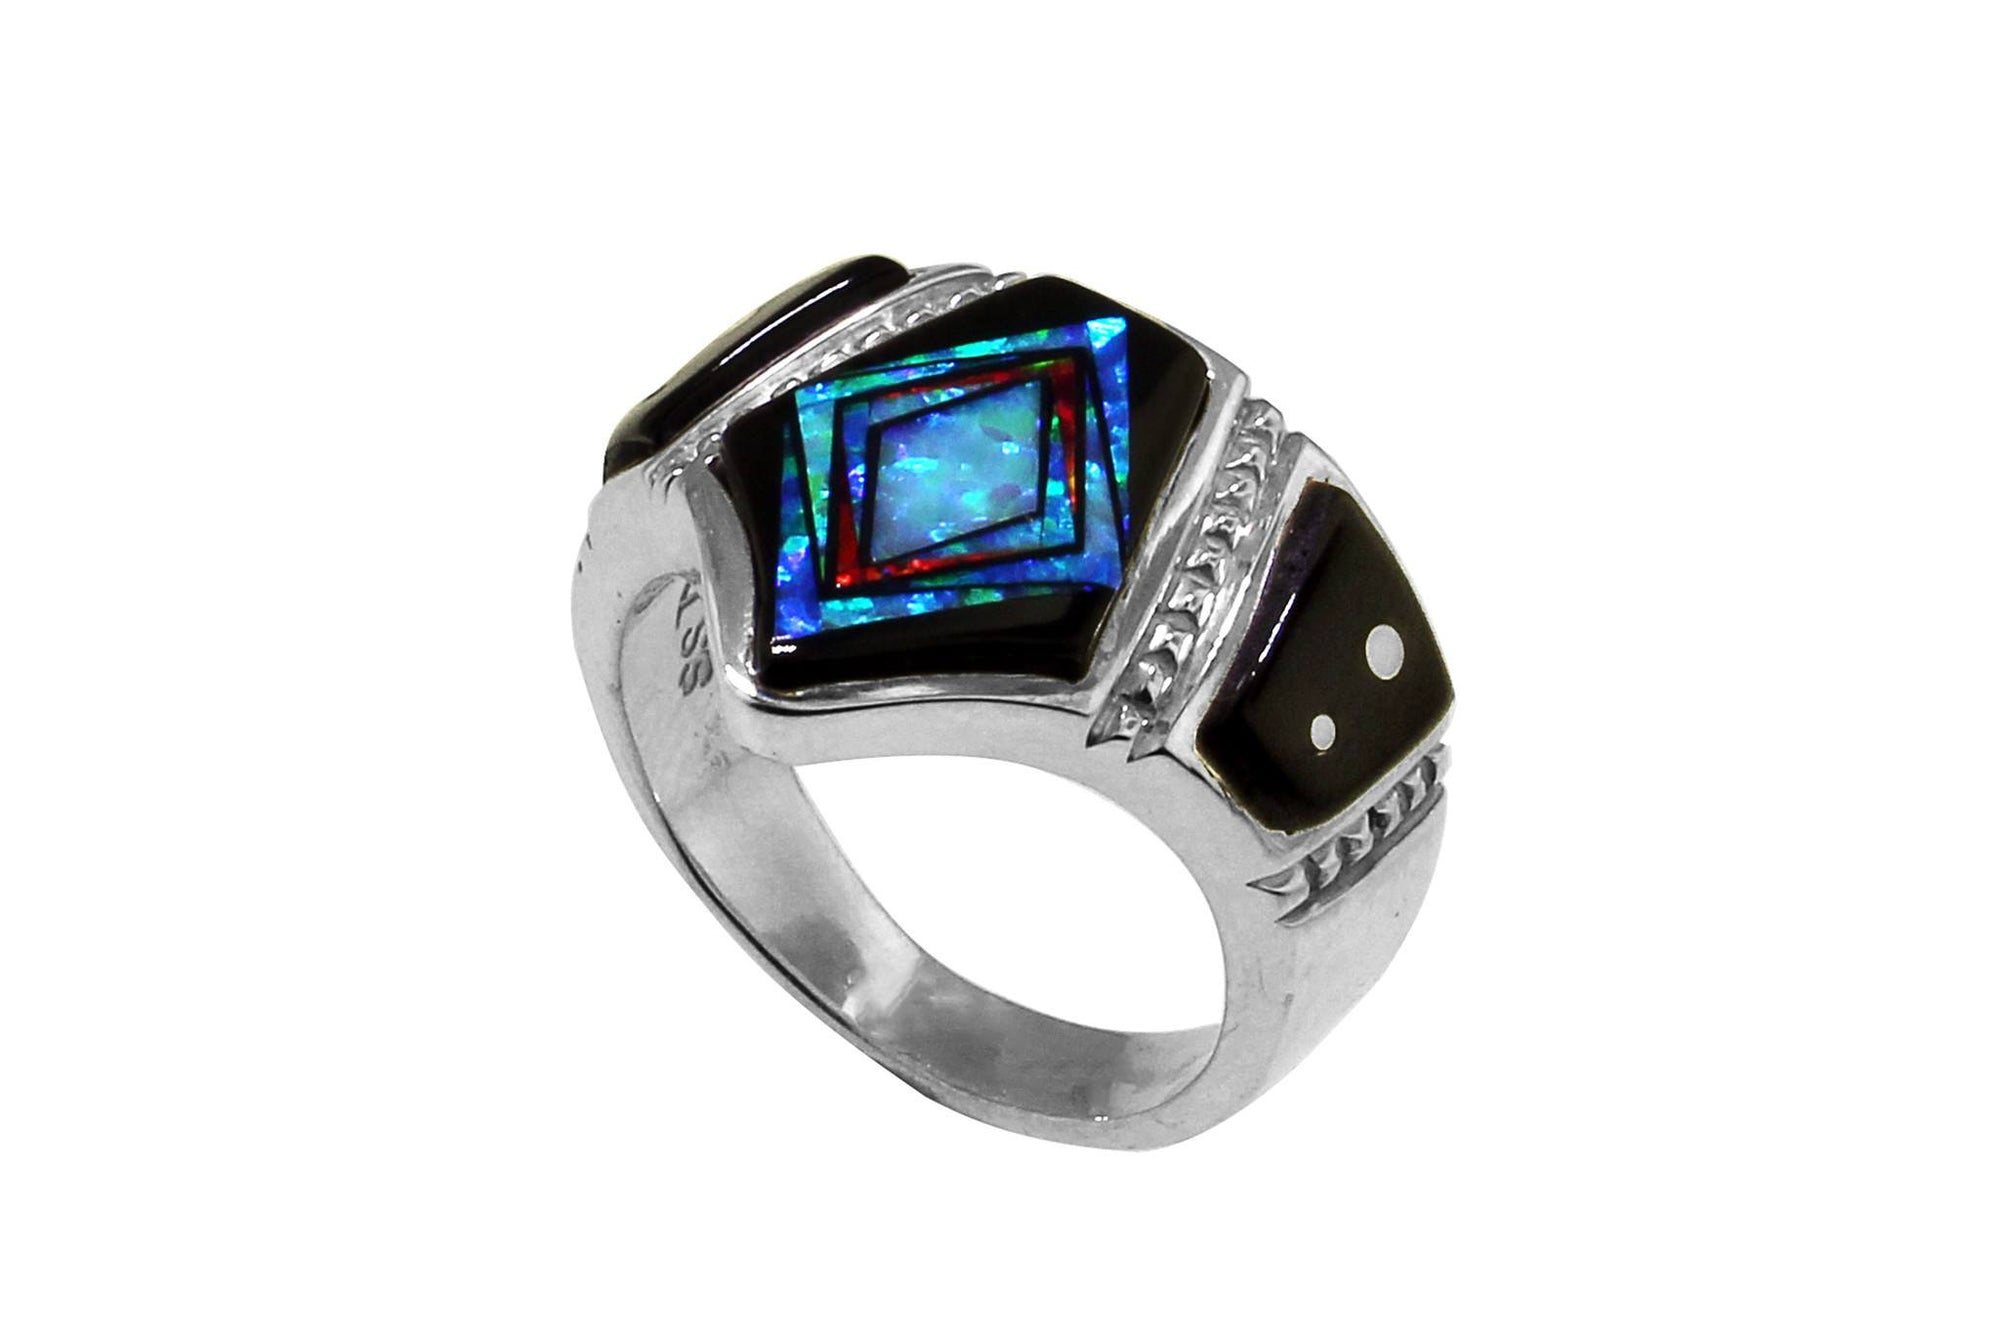 Native American Jewelry - David Rosales Red Moon Ring